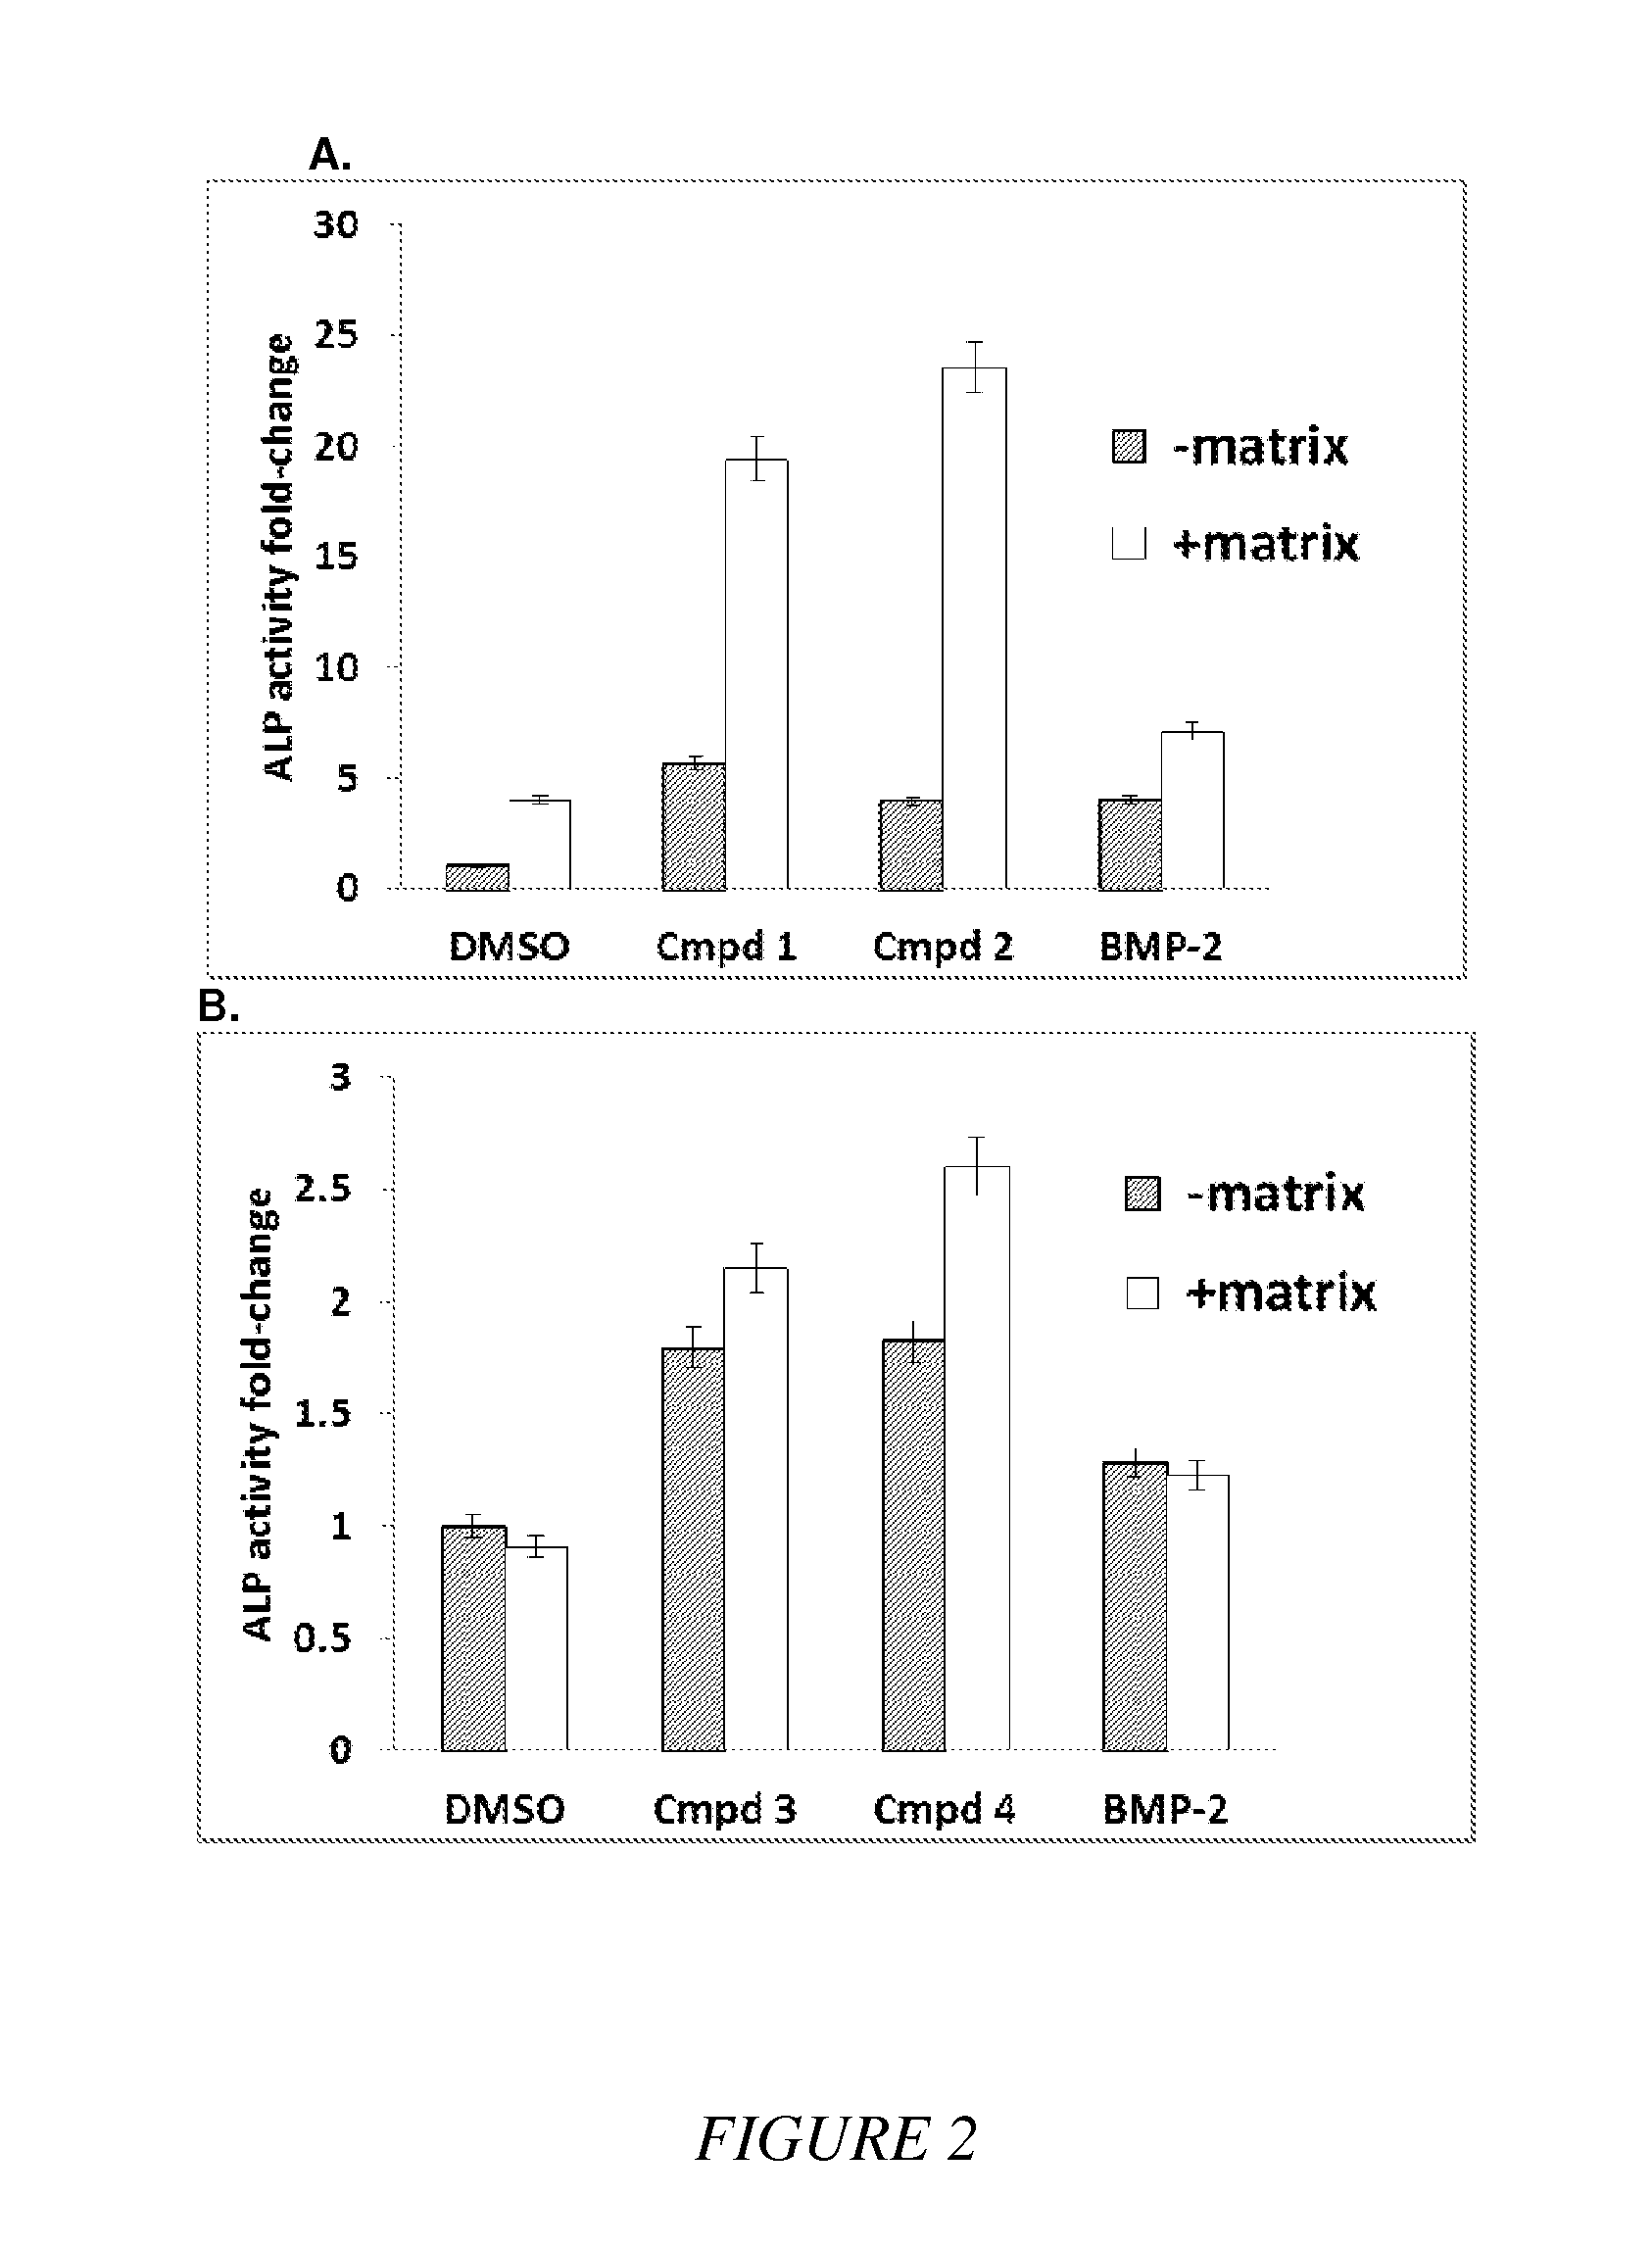 Compounds and matrices for use in bone growth and repair